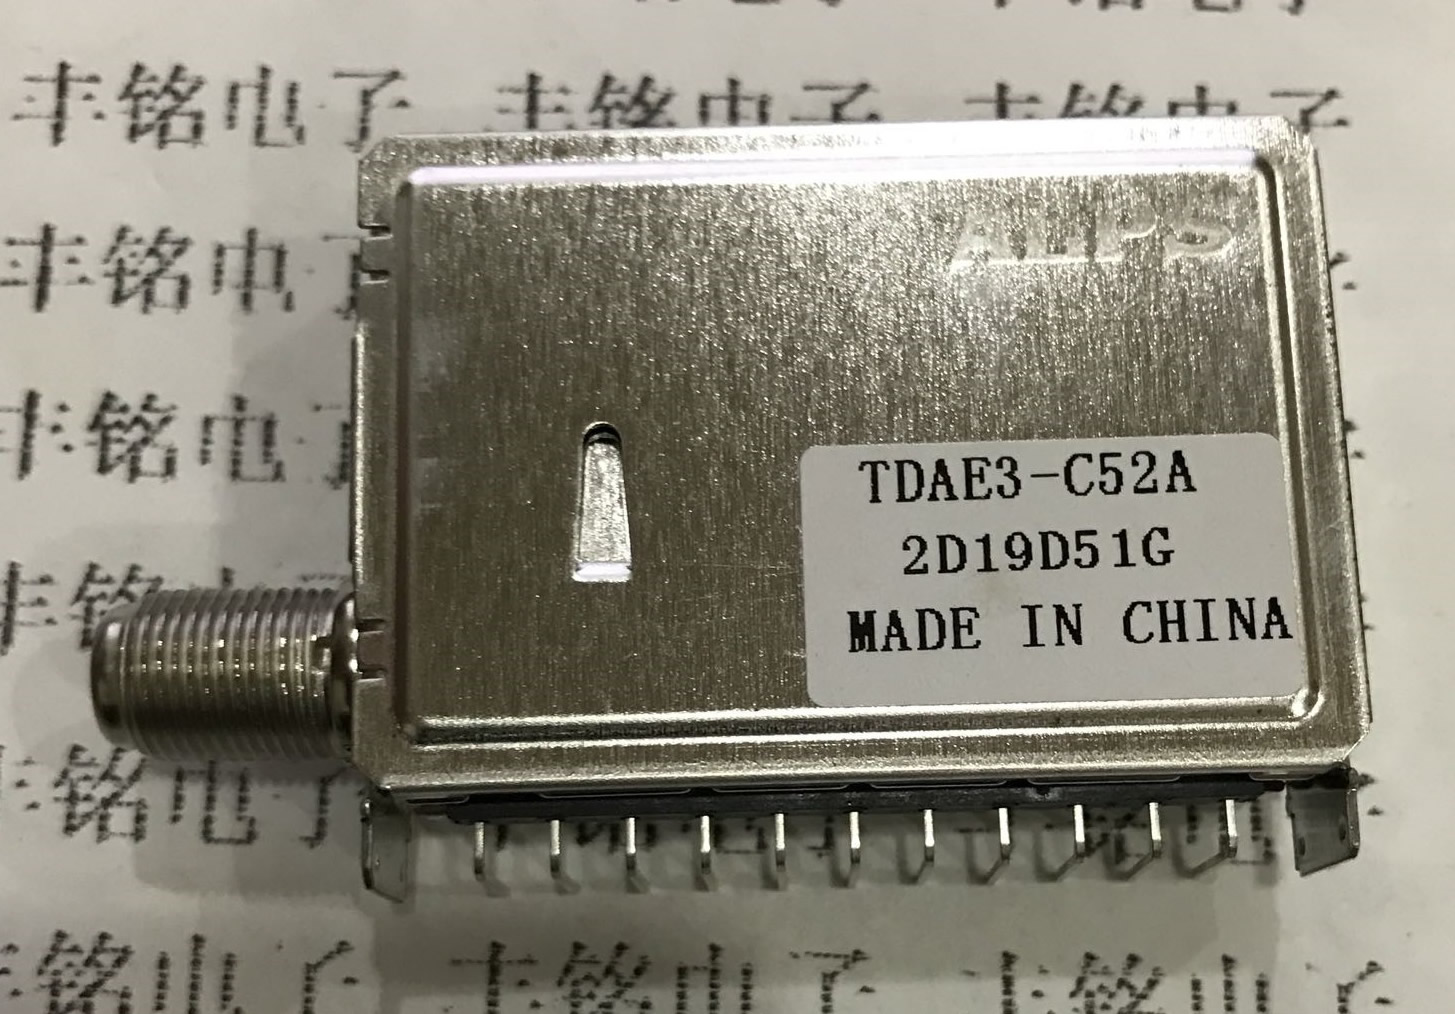 TDAE3-C52A alps TUNER